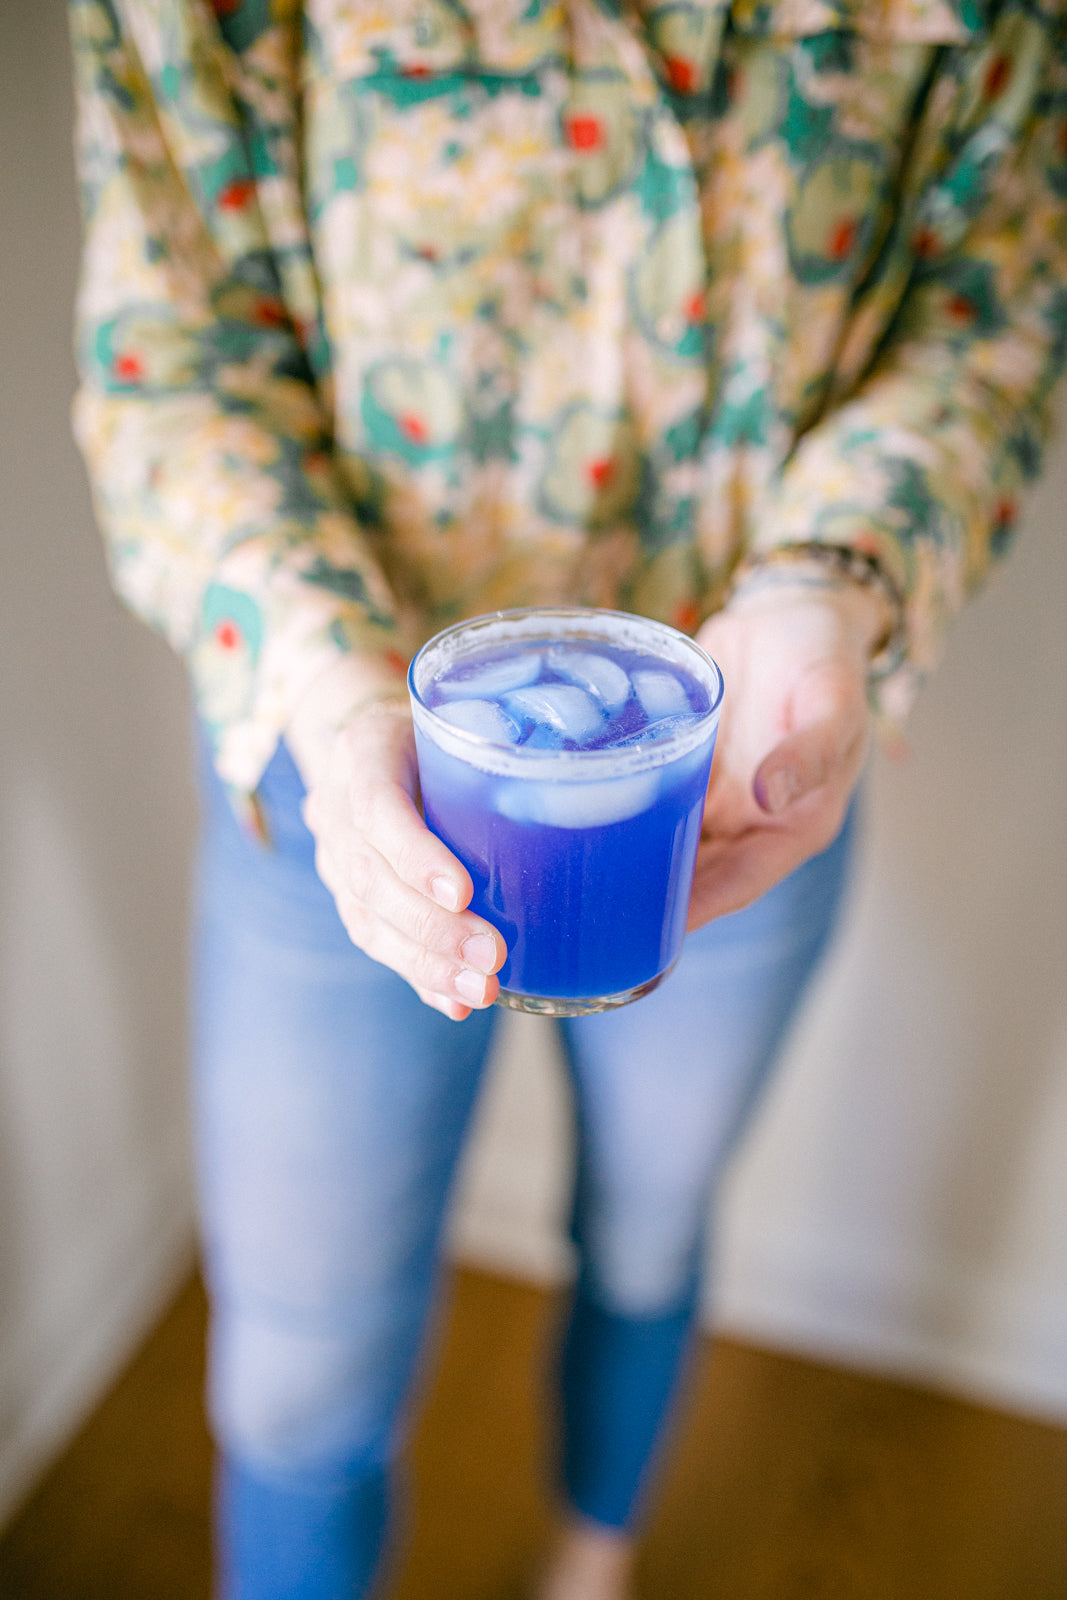 image of a hand holding a cup with the magic magnesium prepared - a vivid blue liquid